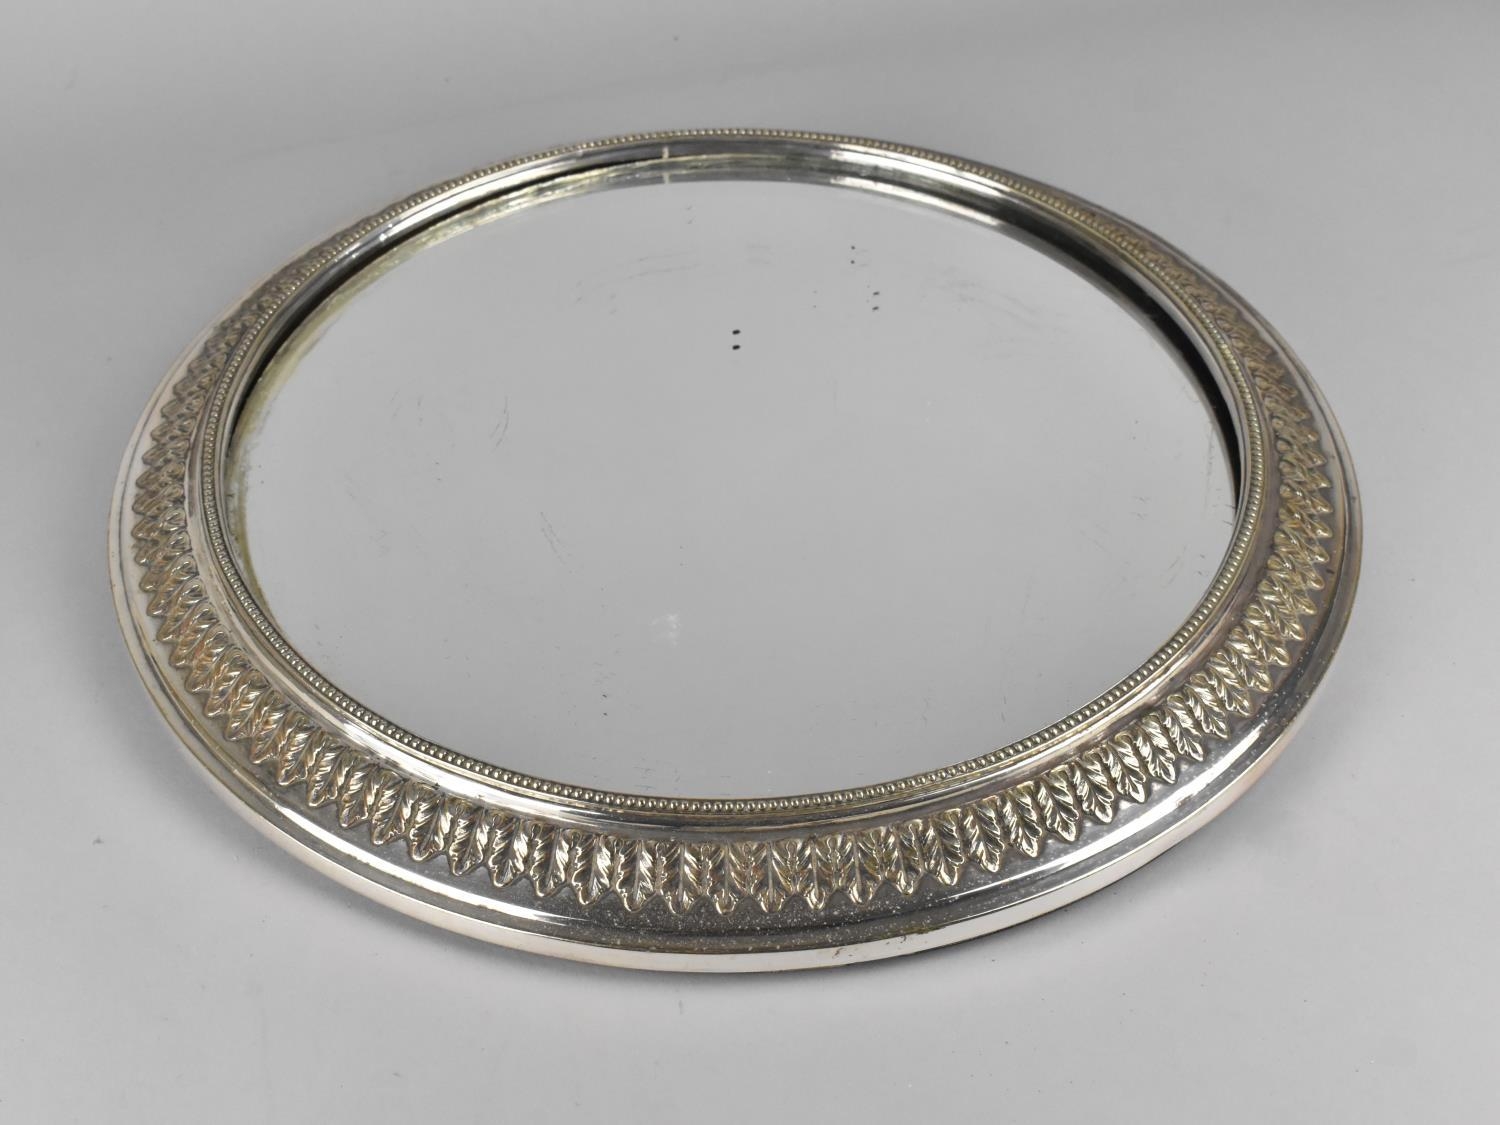 A Mid/Late 20th Century Mirrored Circular Cake Stand, 40cms Diameter, Missing One Ball Foot